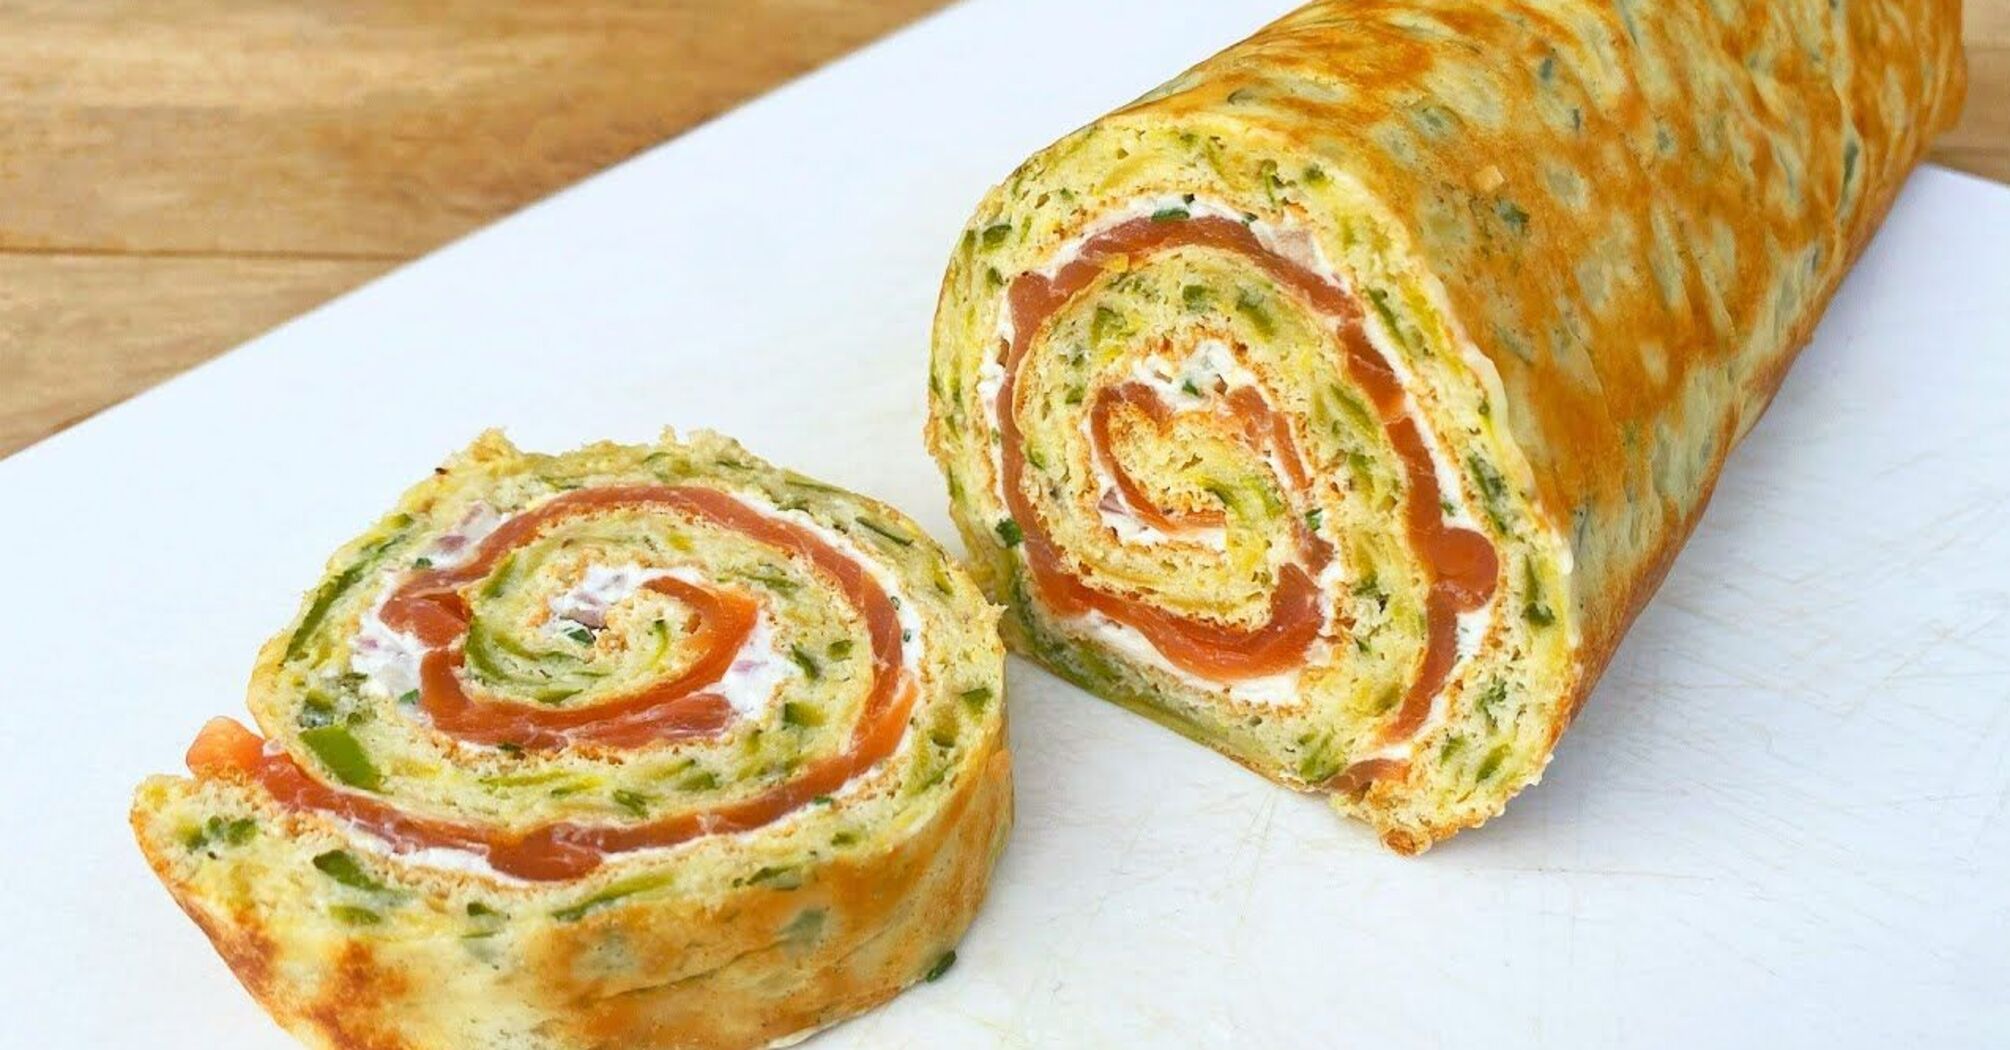 Zucchini roll with cream cheese and red fish: how to prepare the dough to keep its shape